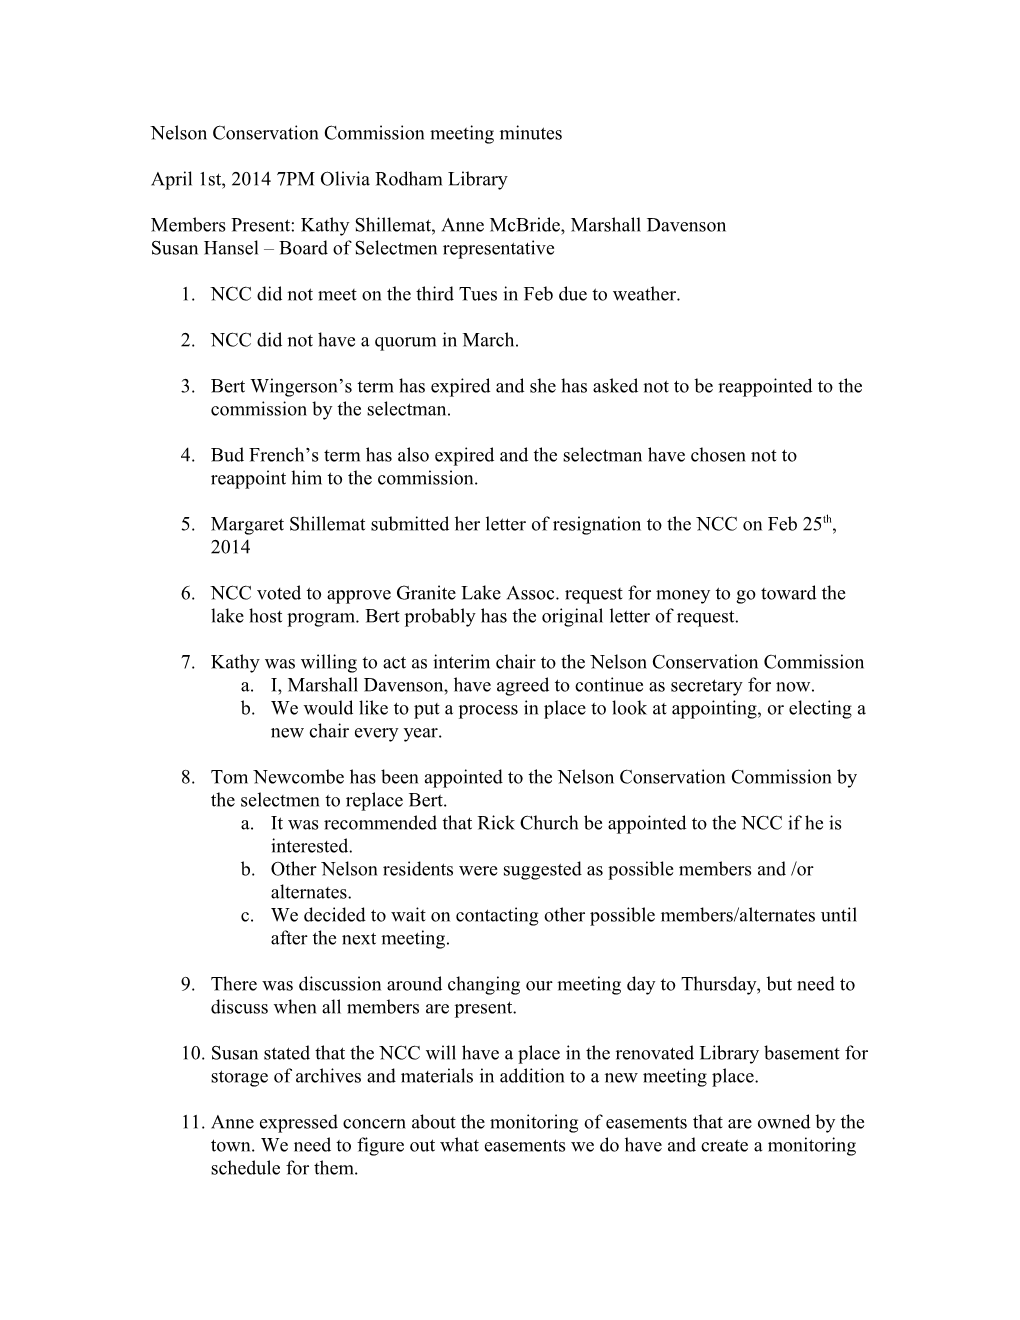 Nelson Conservation Commission Meeting Minutes